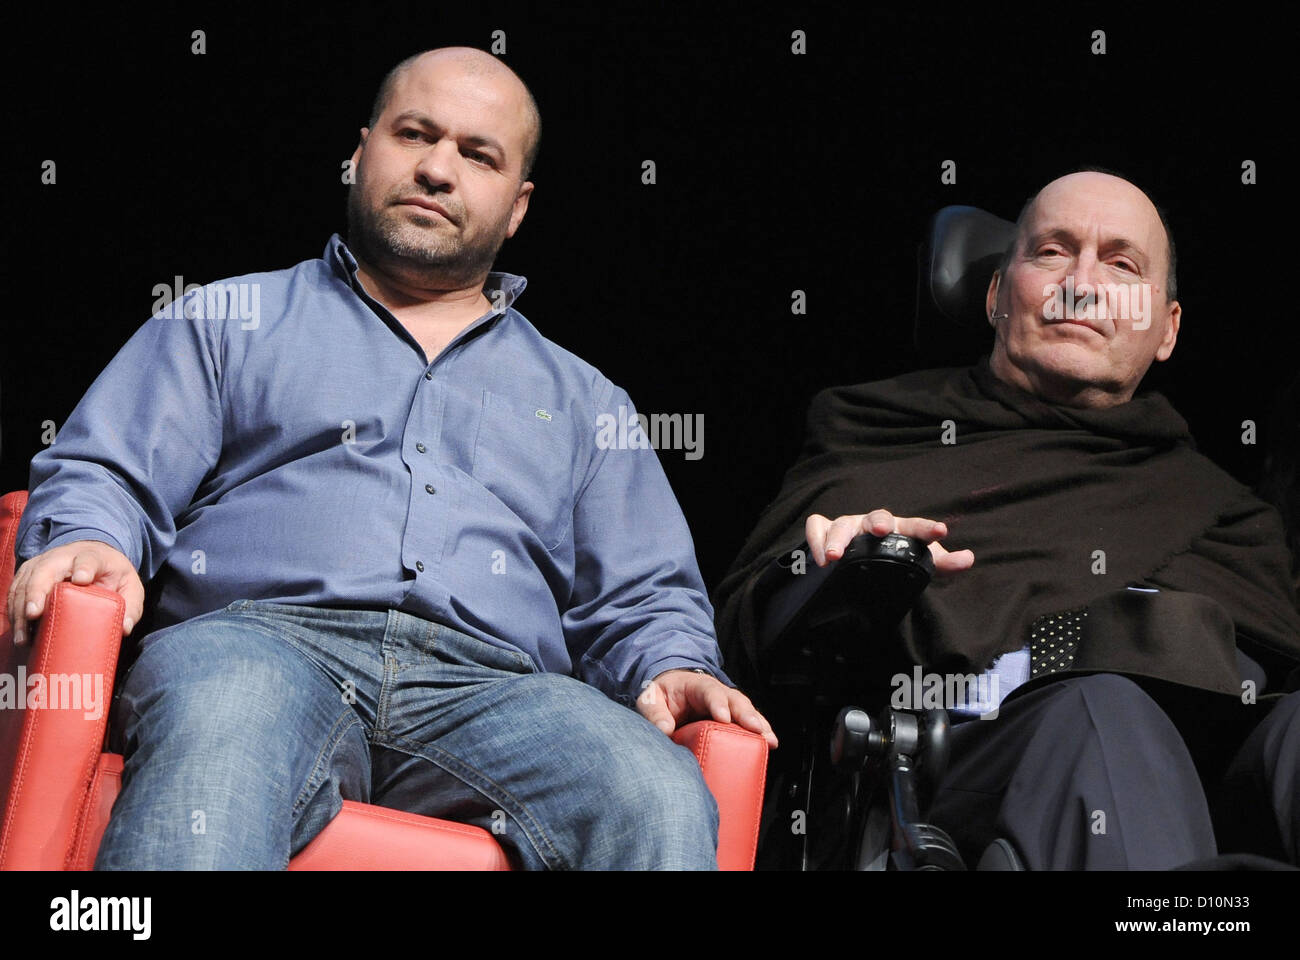 Abdel Sellou (L) and Philippe Pozzo di Borgo sit next to each other during  a reading session on stage in the Columbiahalle arts and concert venue in  Berlin, Germany, 3 December 2012.